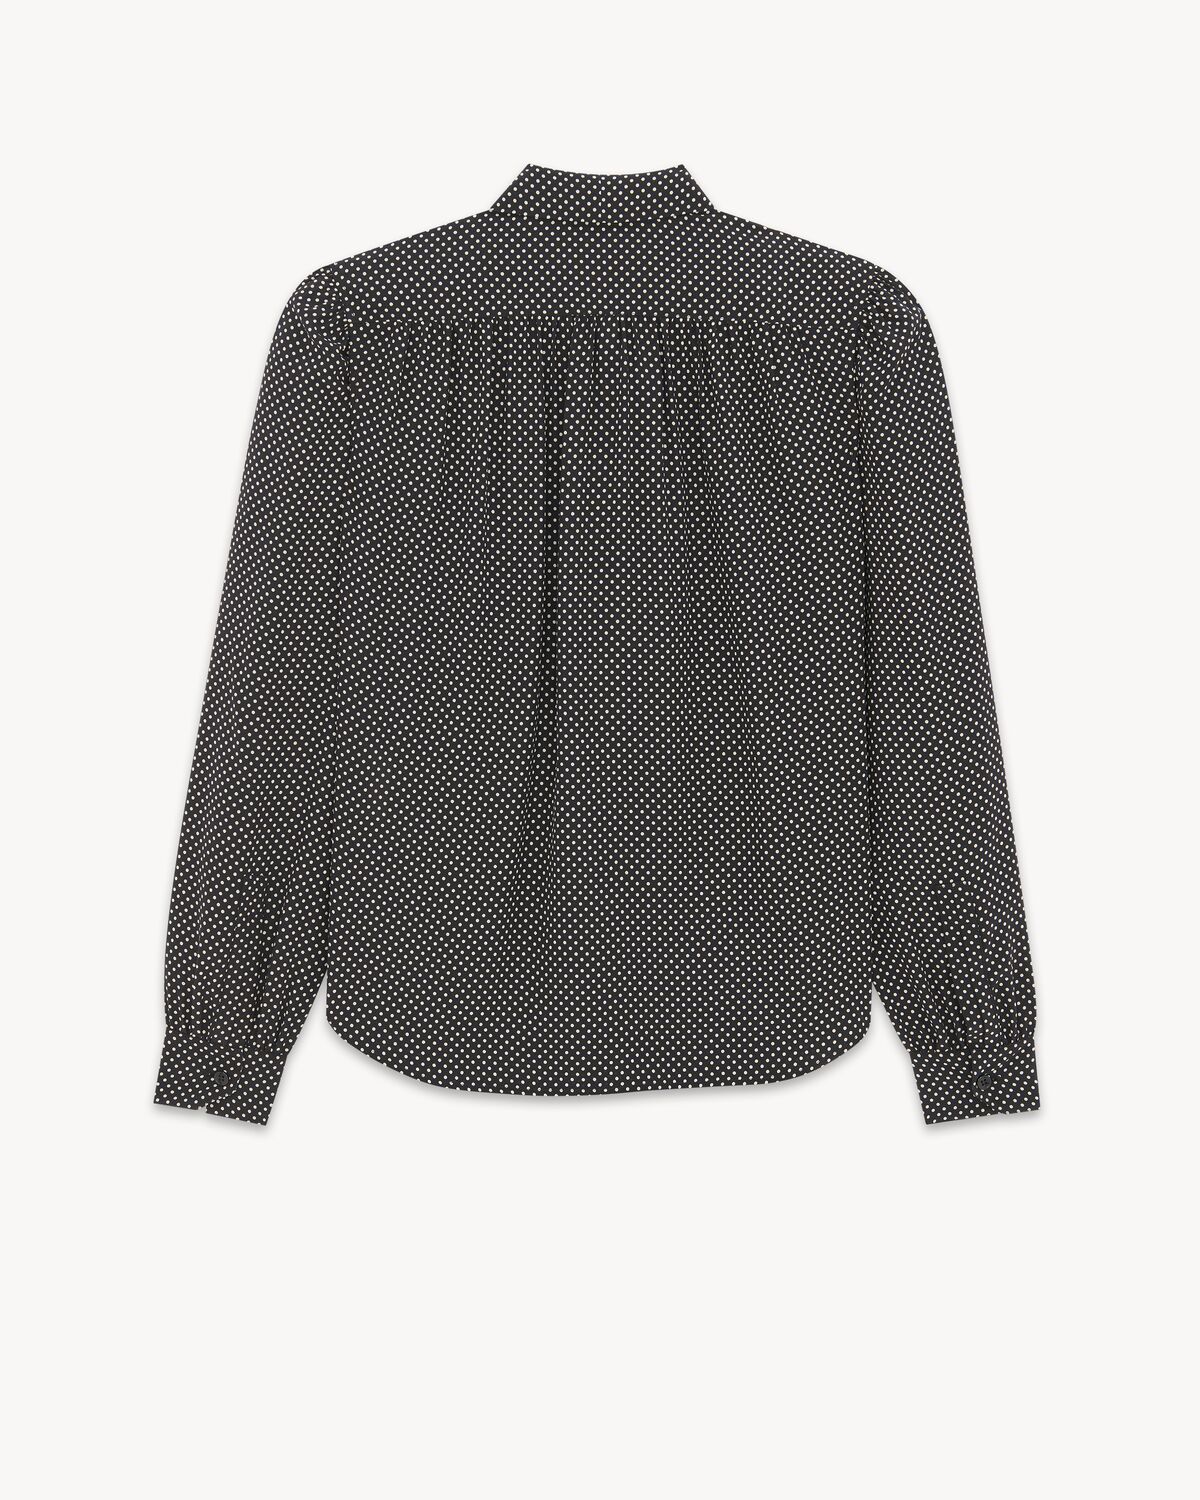 lavallière-neck blouse in dotted silk satin